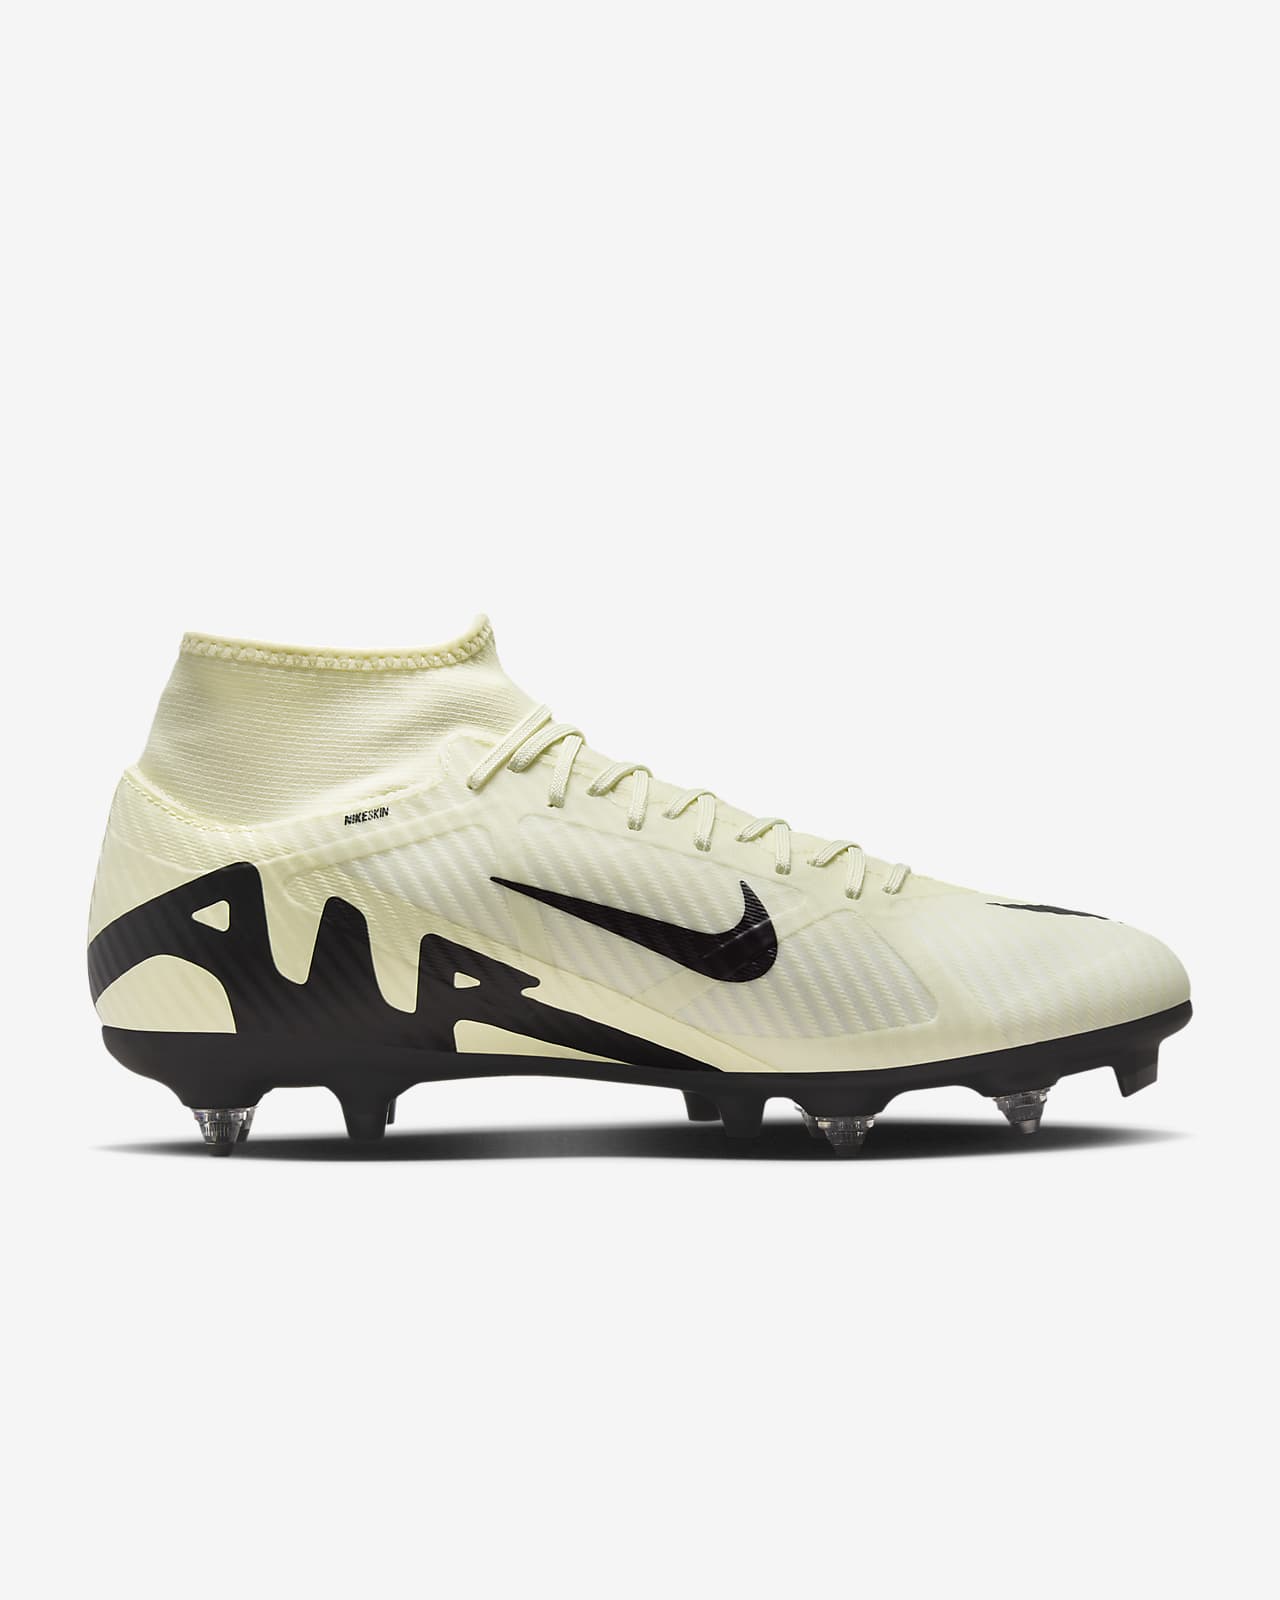 Chaussures De Football Moulées Adulte ZOOM SUPERFLY 9 ACADEMY FG/MG NIKE